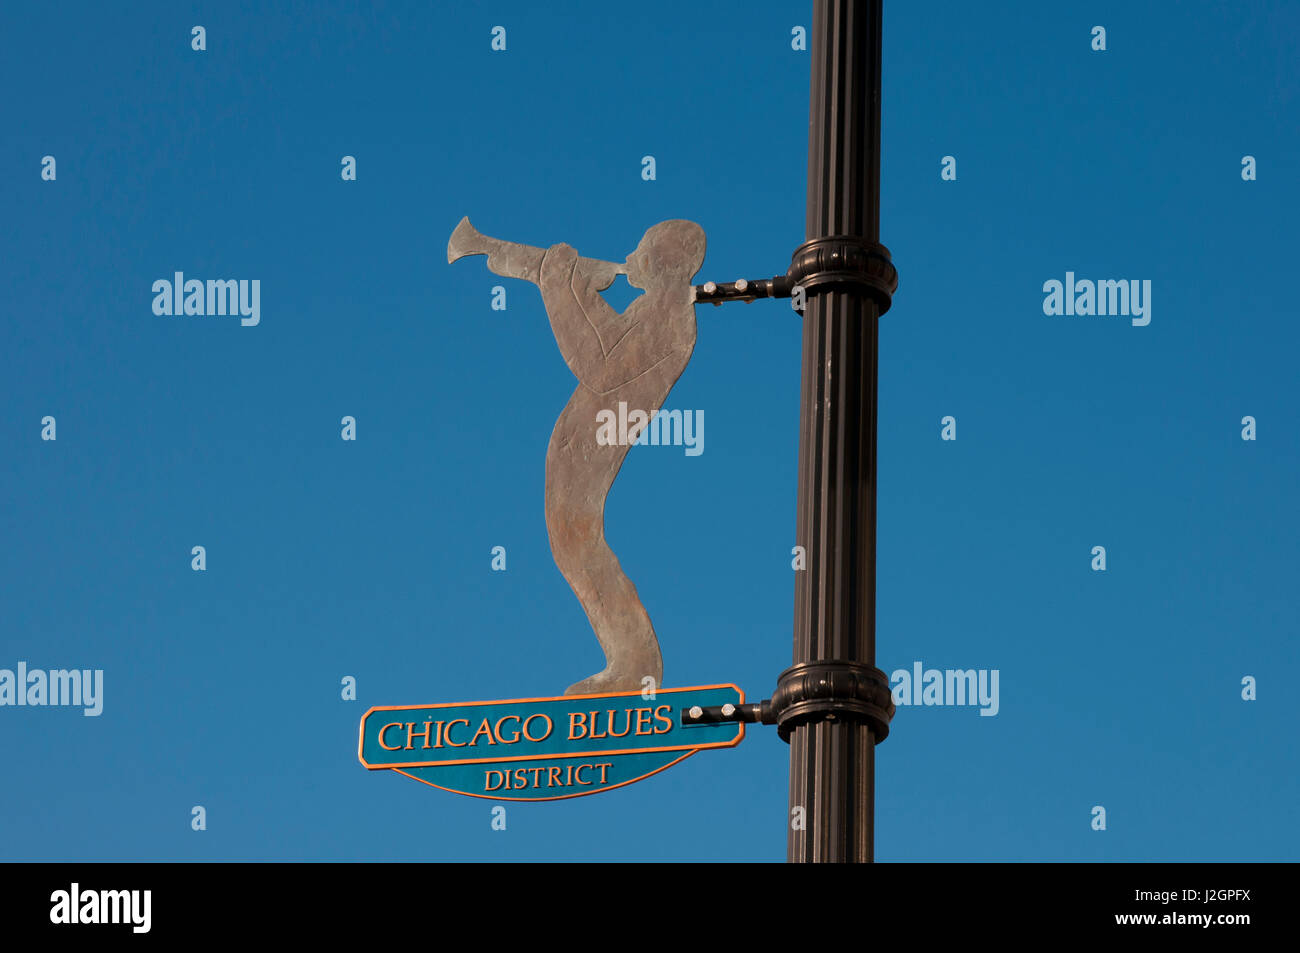 Ornamental lamp post in Chicago Blues District, Southside, 47th street Stock Photo